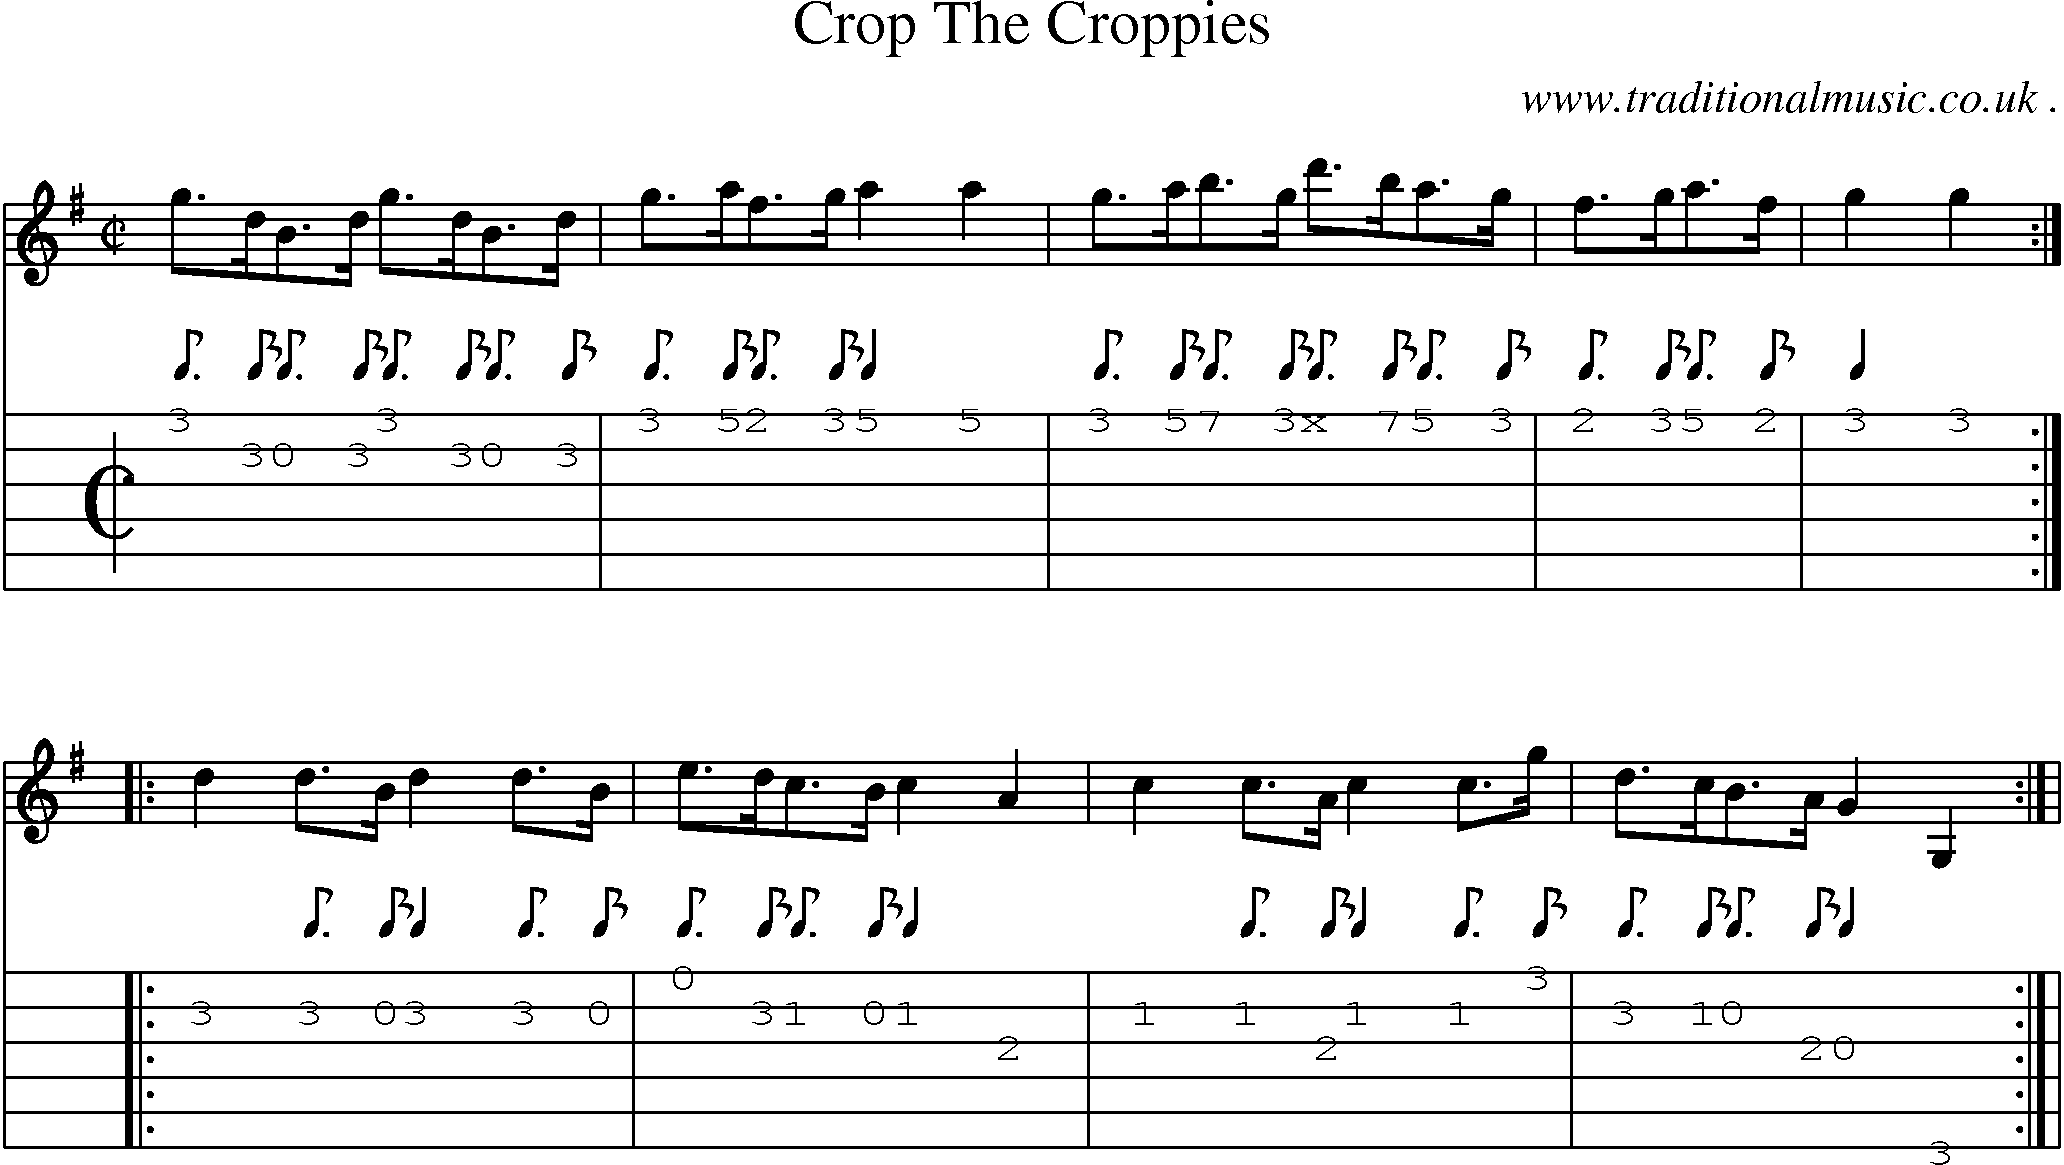 Sheet-Music and Guitar Tabs for Crop The Croppies